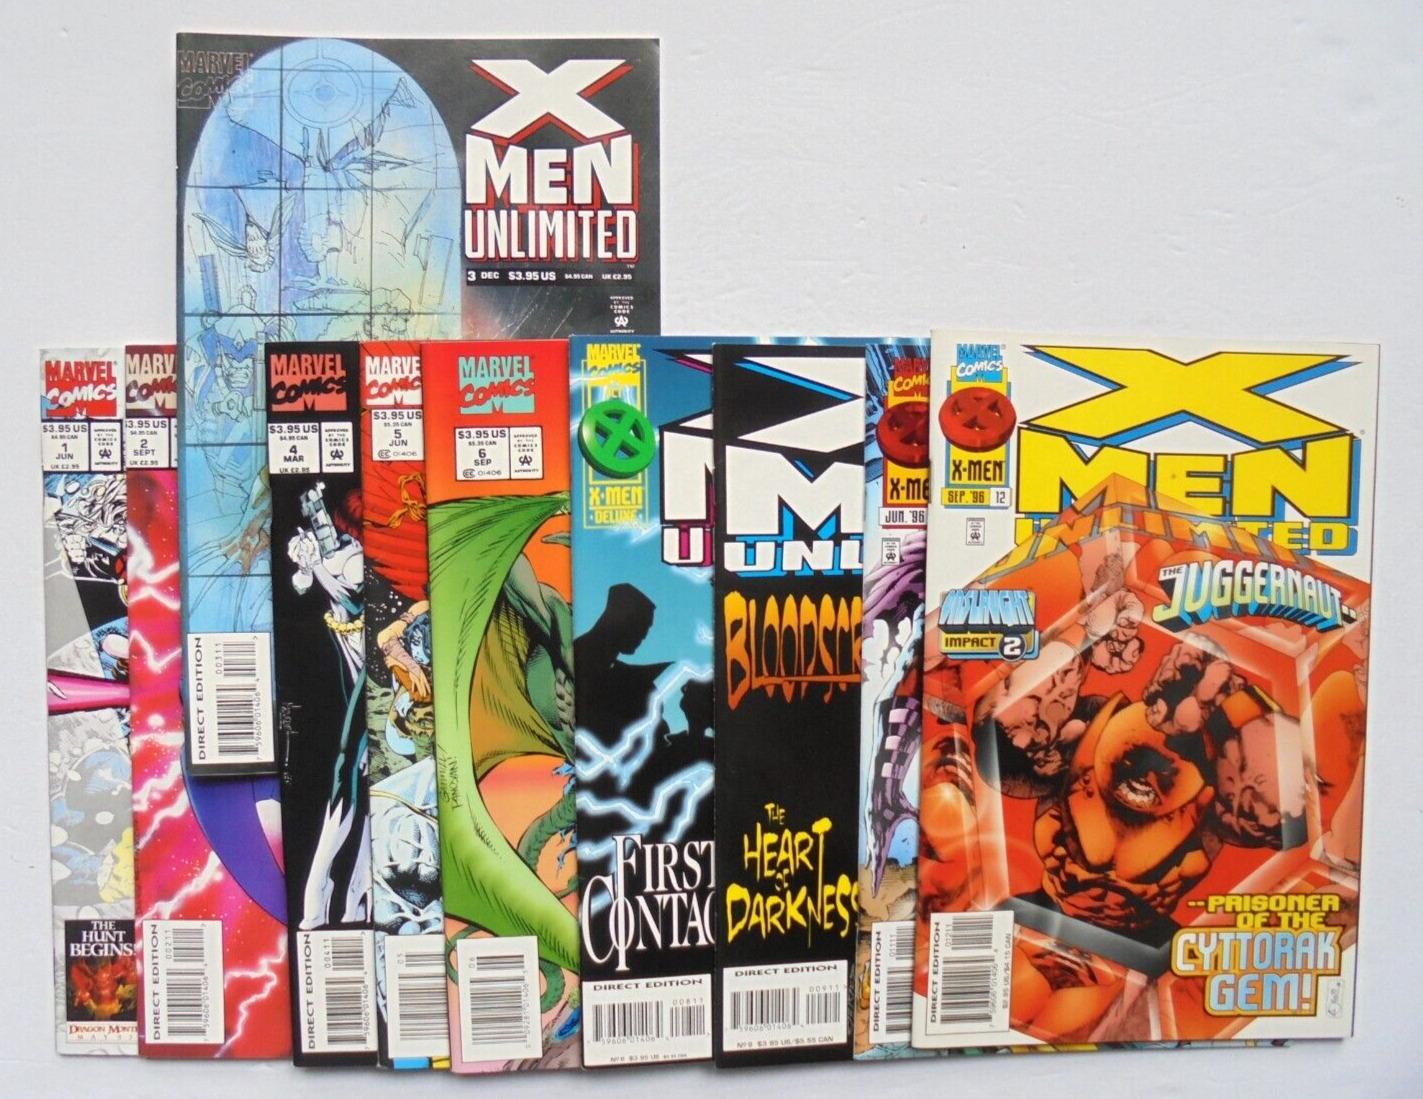 10 X-Men Unlimited Marvel Comics Lot #1,2,3,4,5,6,8, 9,11,12 Bagged and Boarded